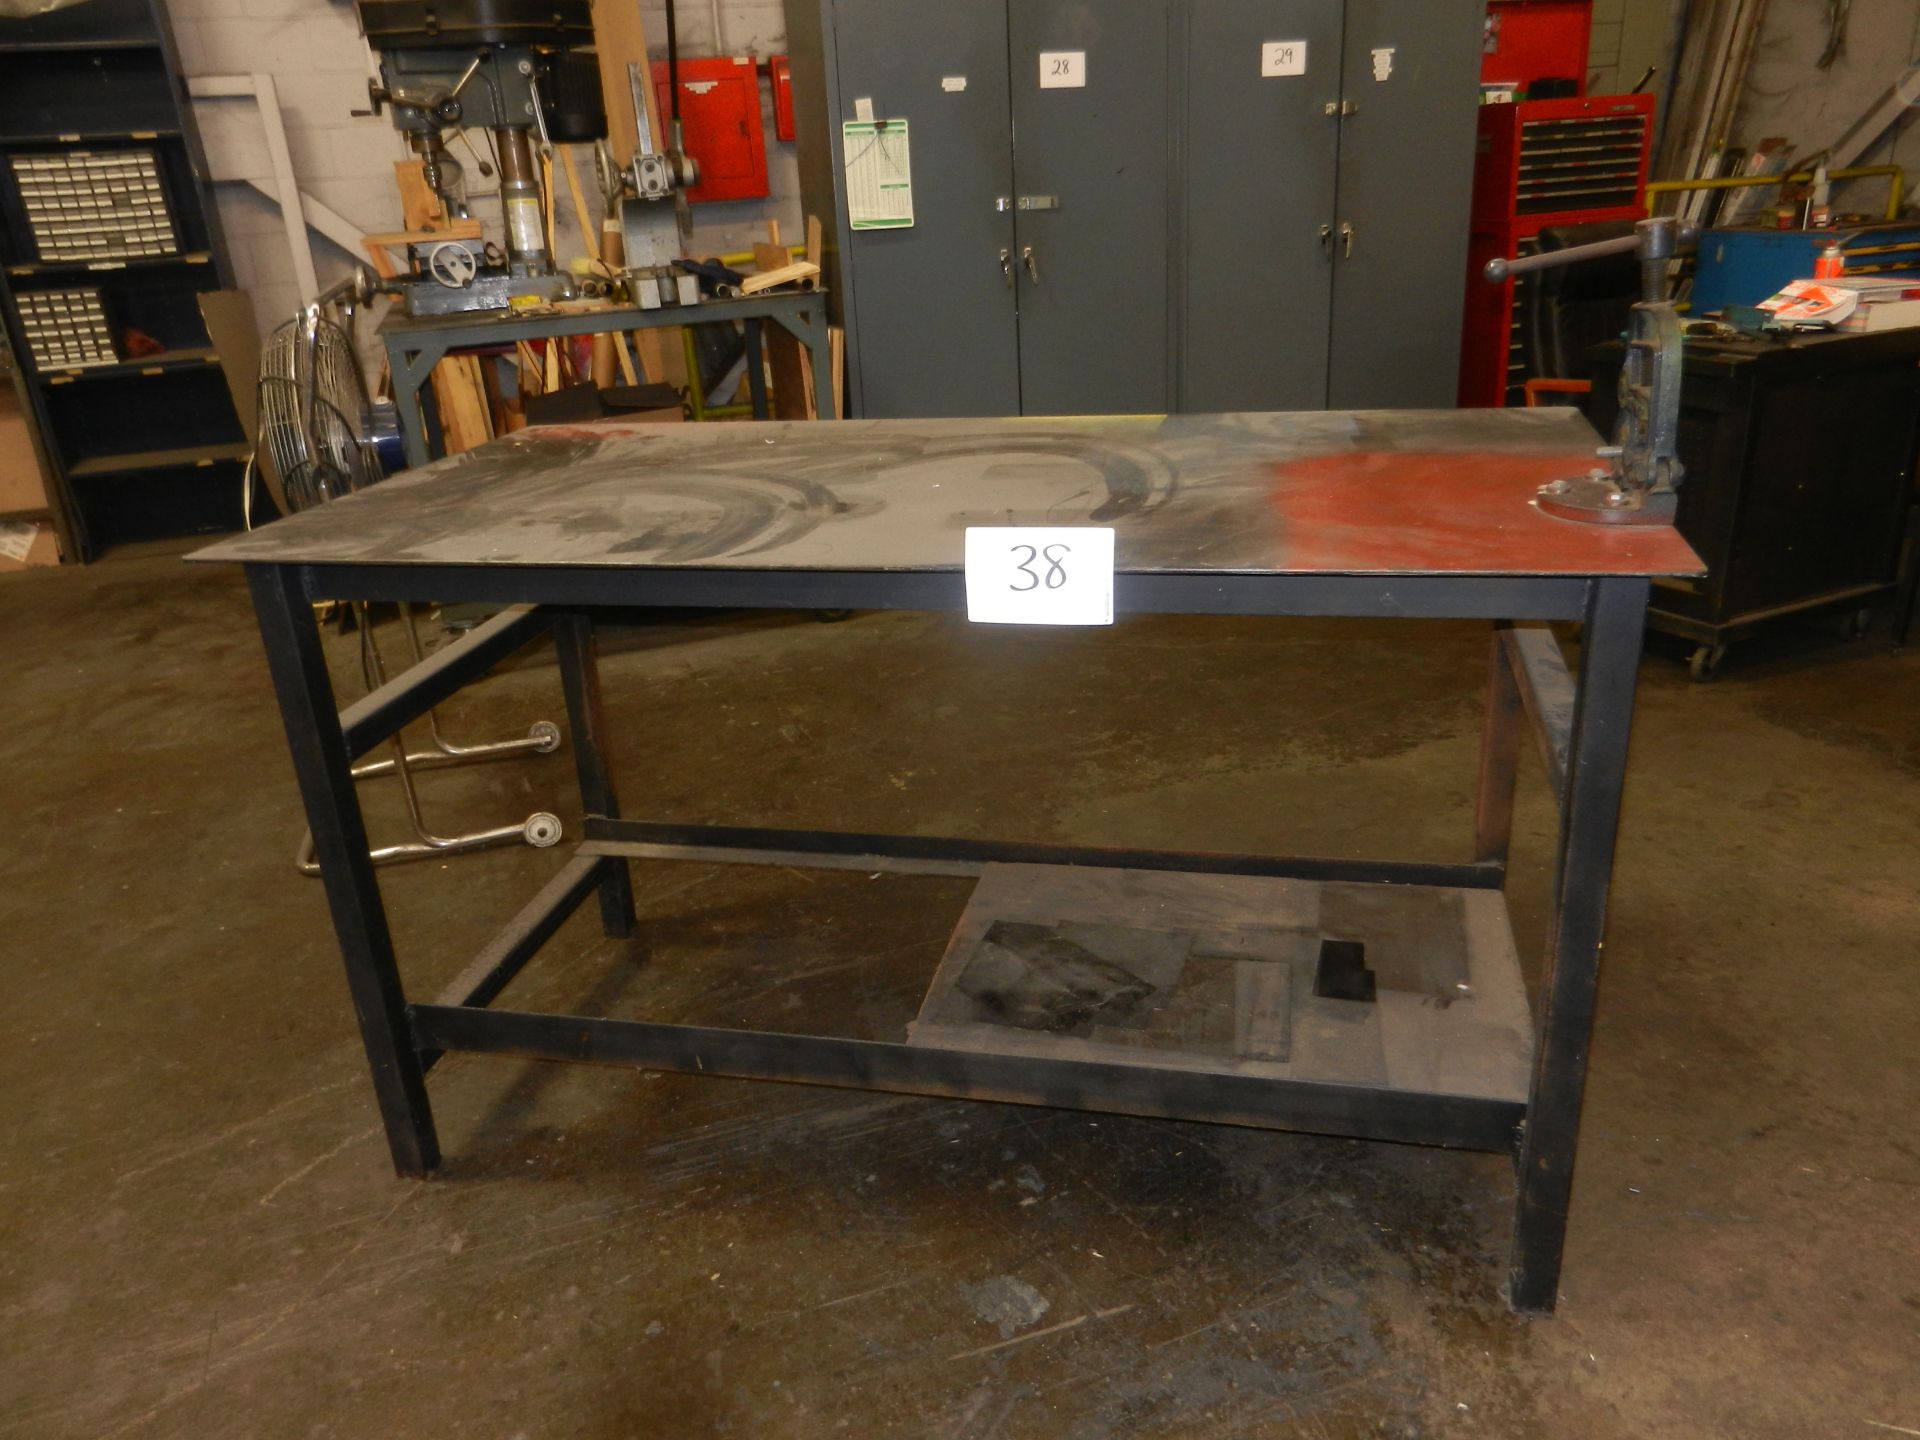 68x34x38 Metal Table with Brie Tool Works Pipe Clamp